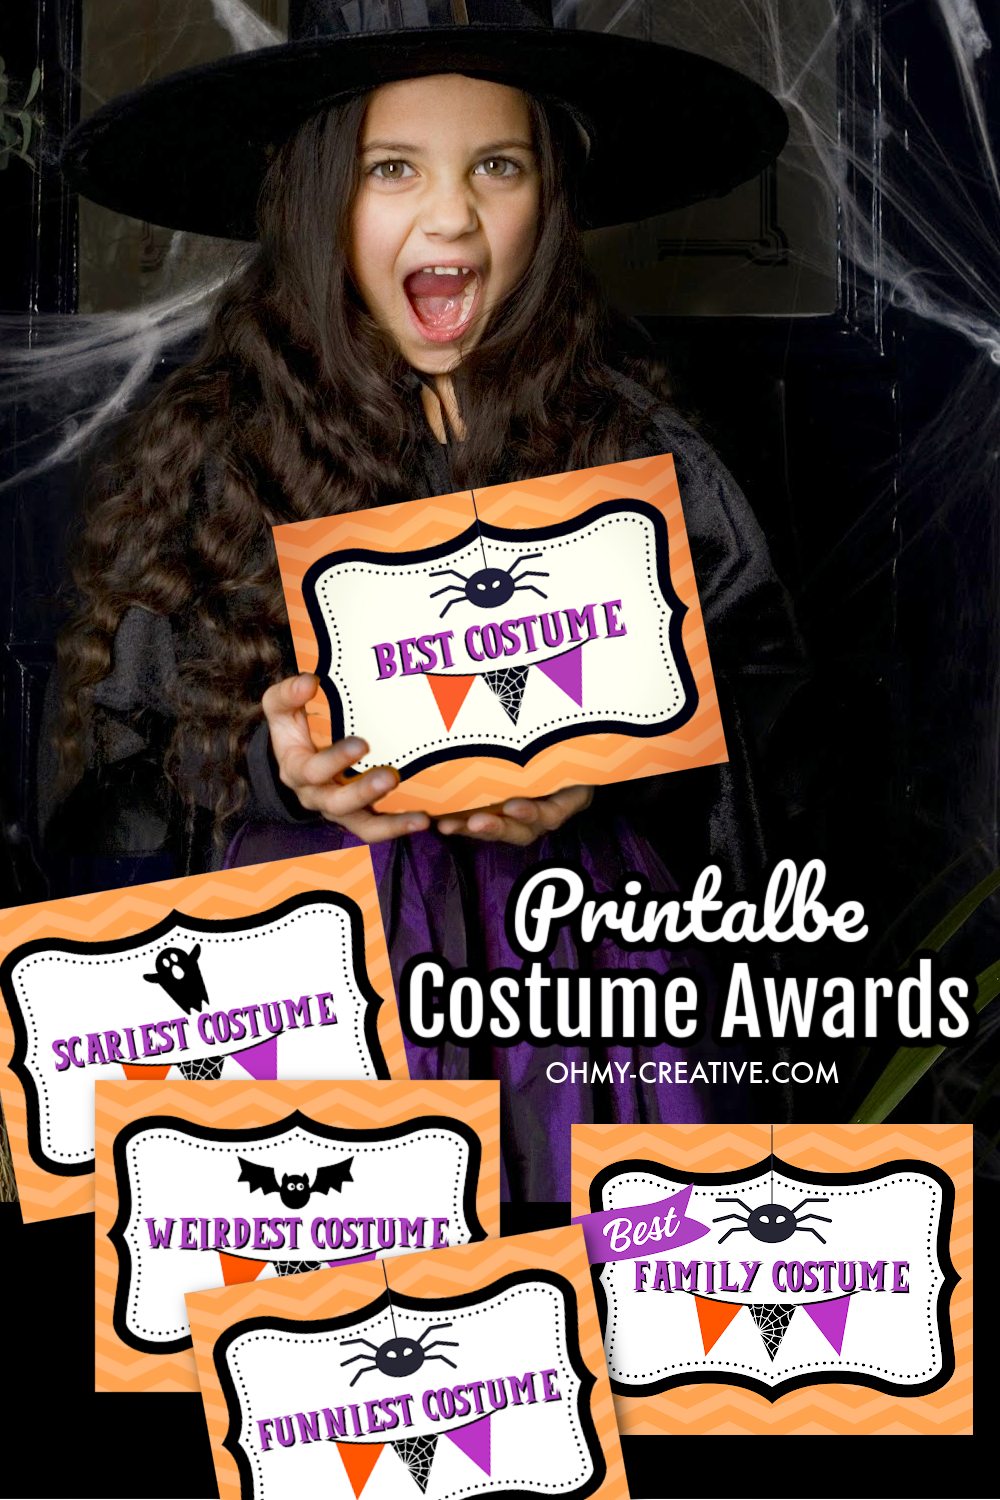 A girl dressed in a witch costume holding a Best Costume award!